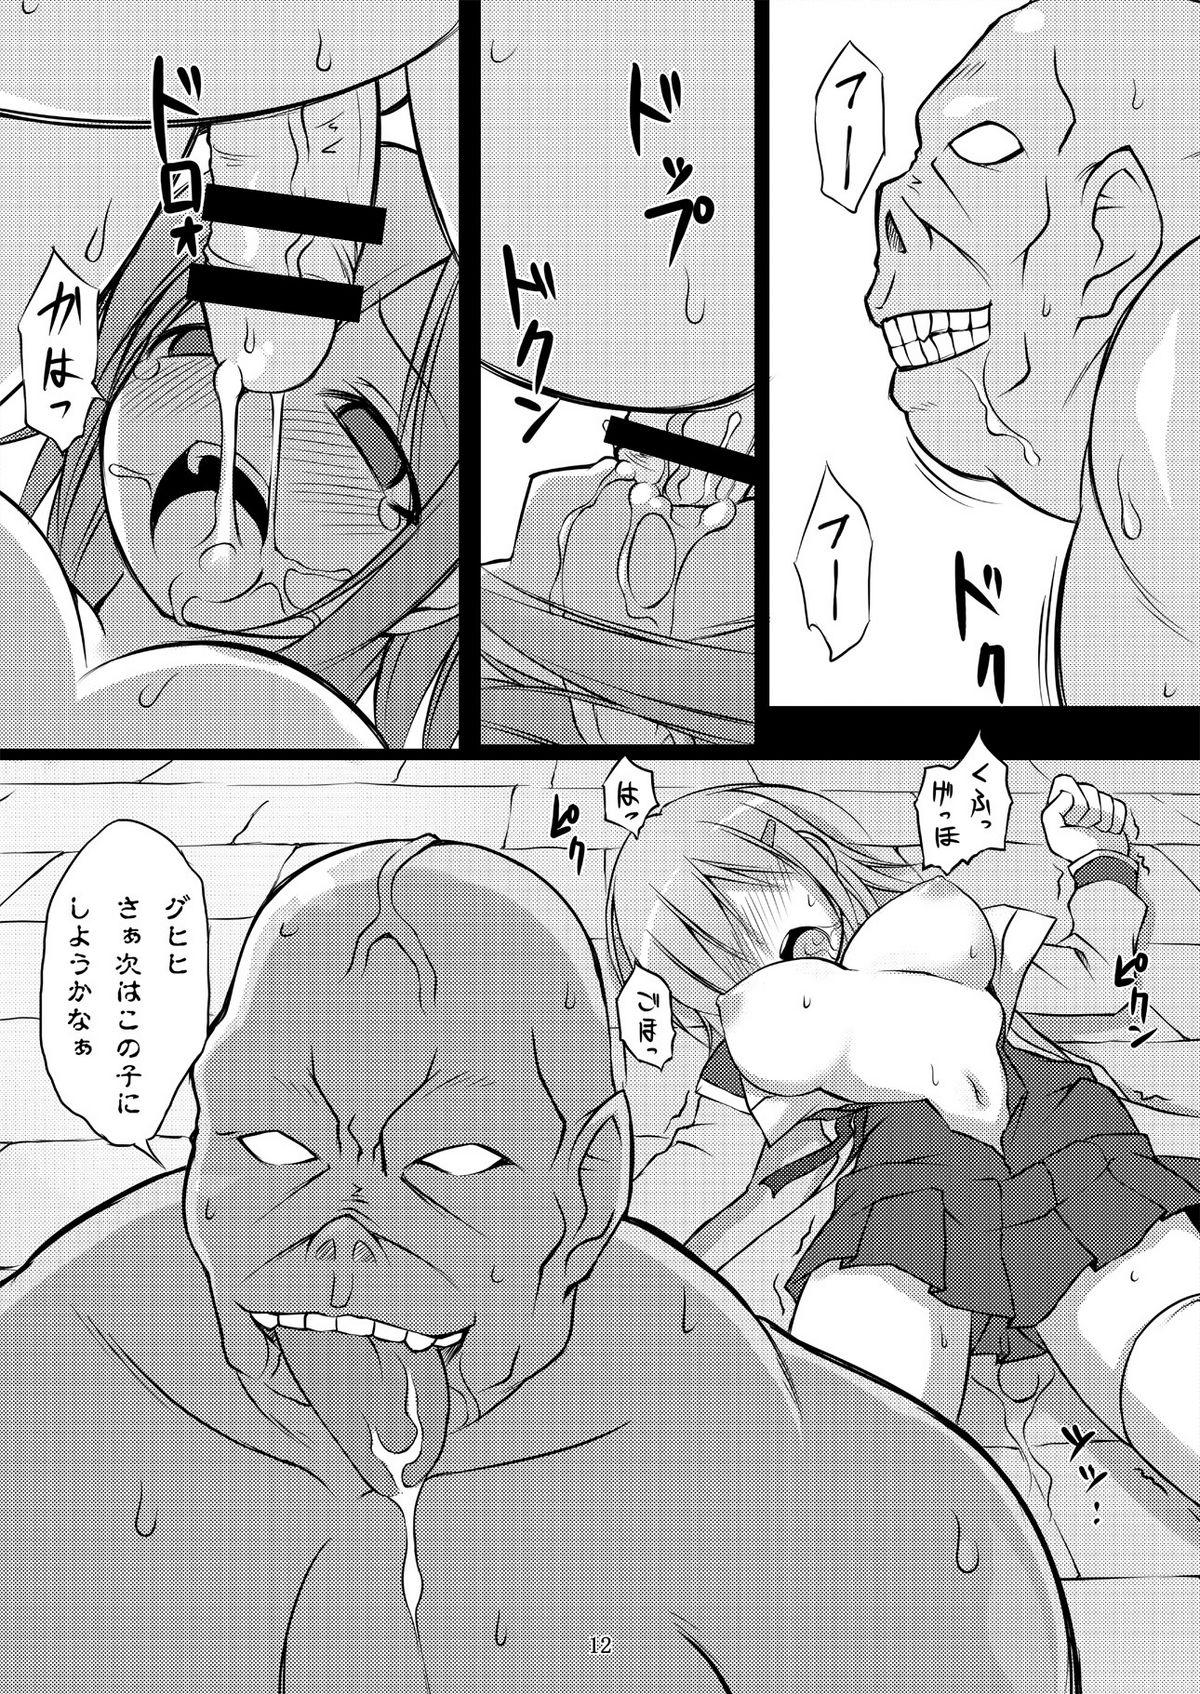 Pawg 魔法戦士触獄に堕つ～獄卒の洗礼～ Gay - Page 12